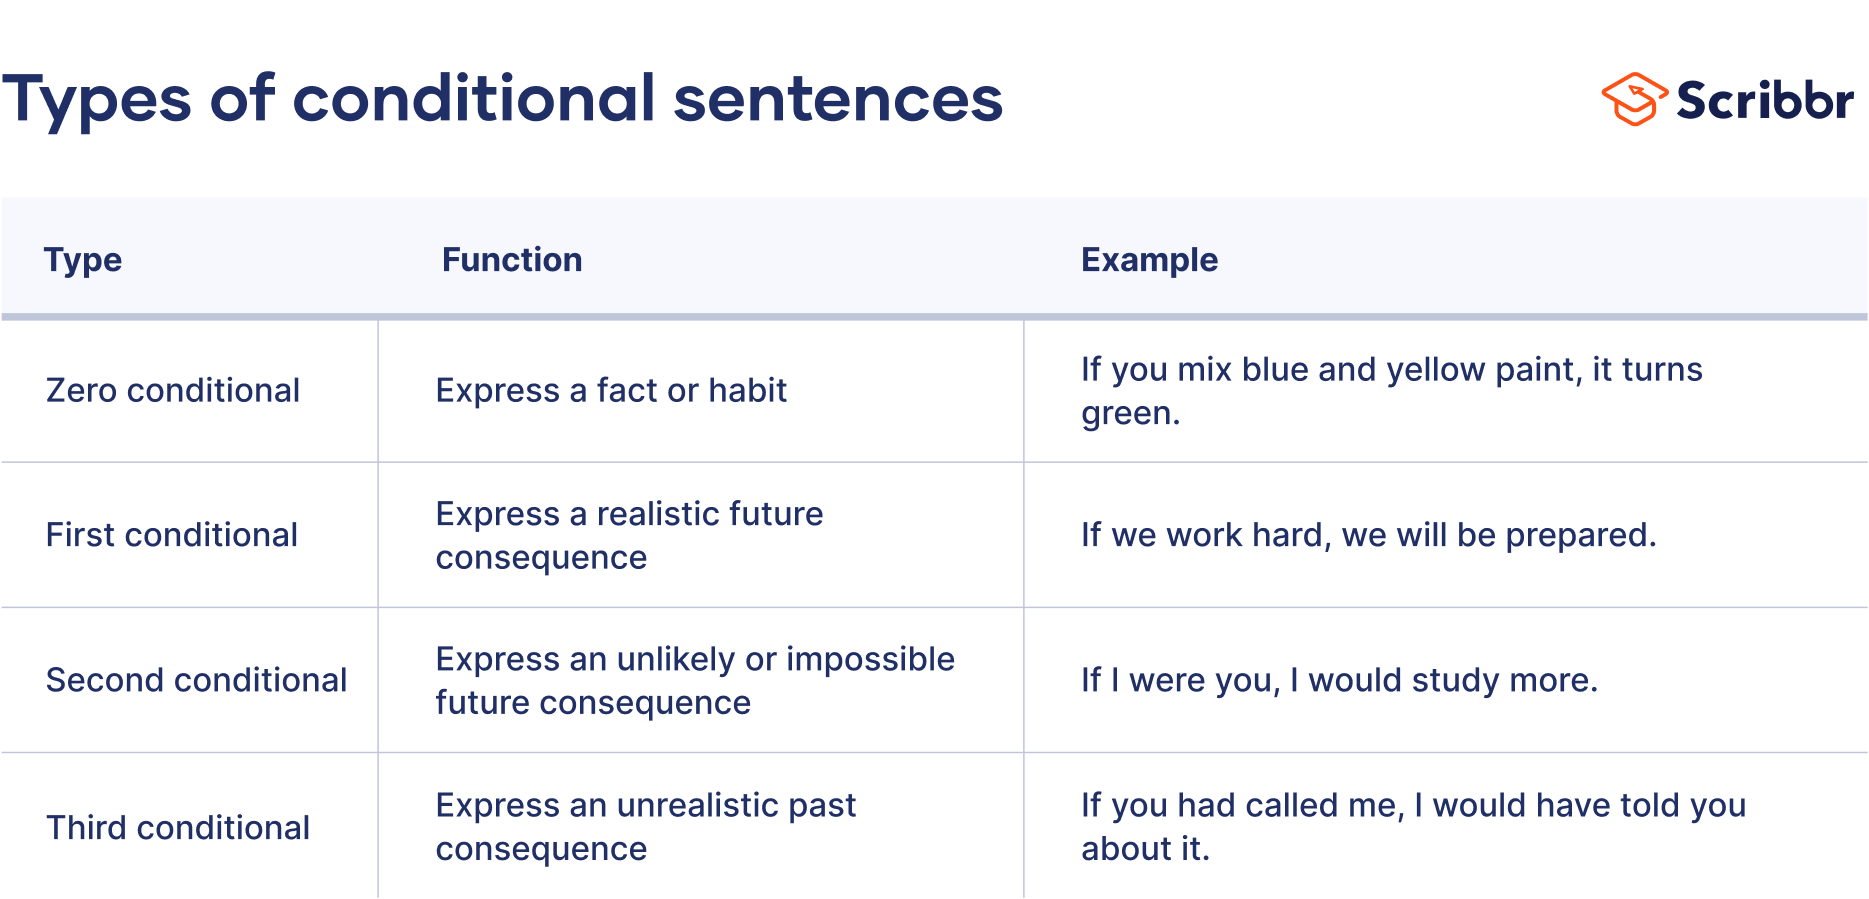 Types of conditional sentences